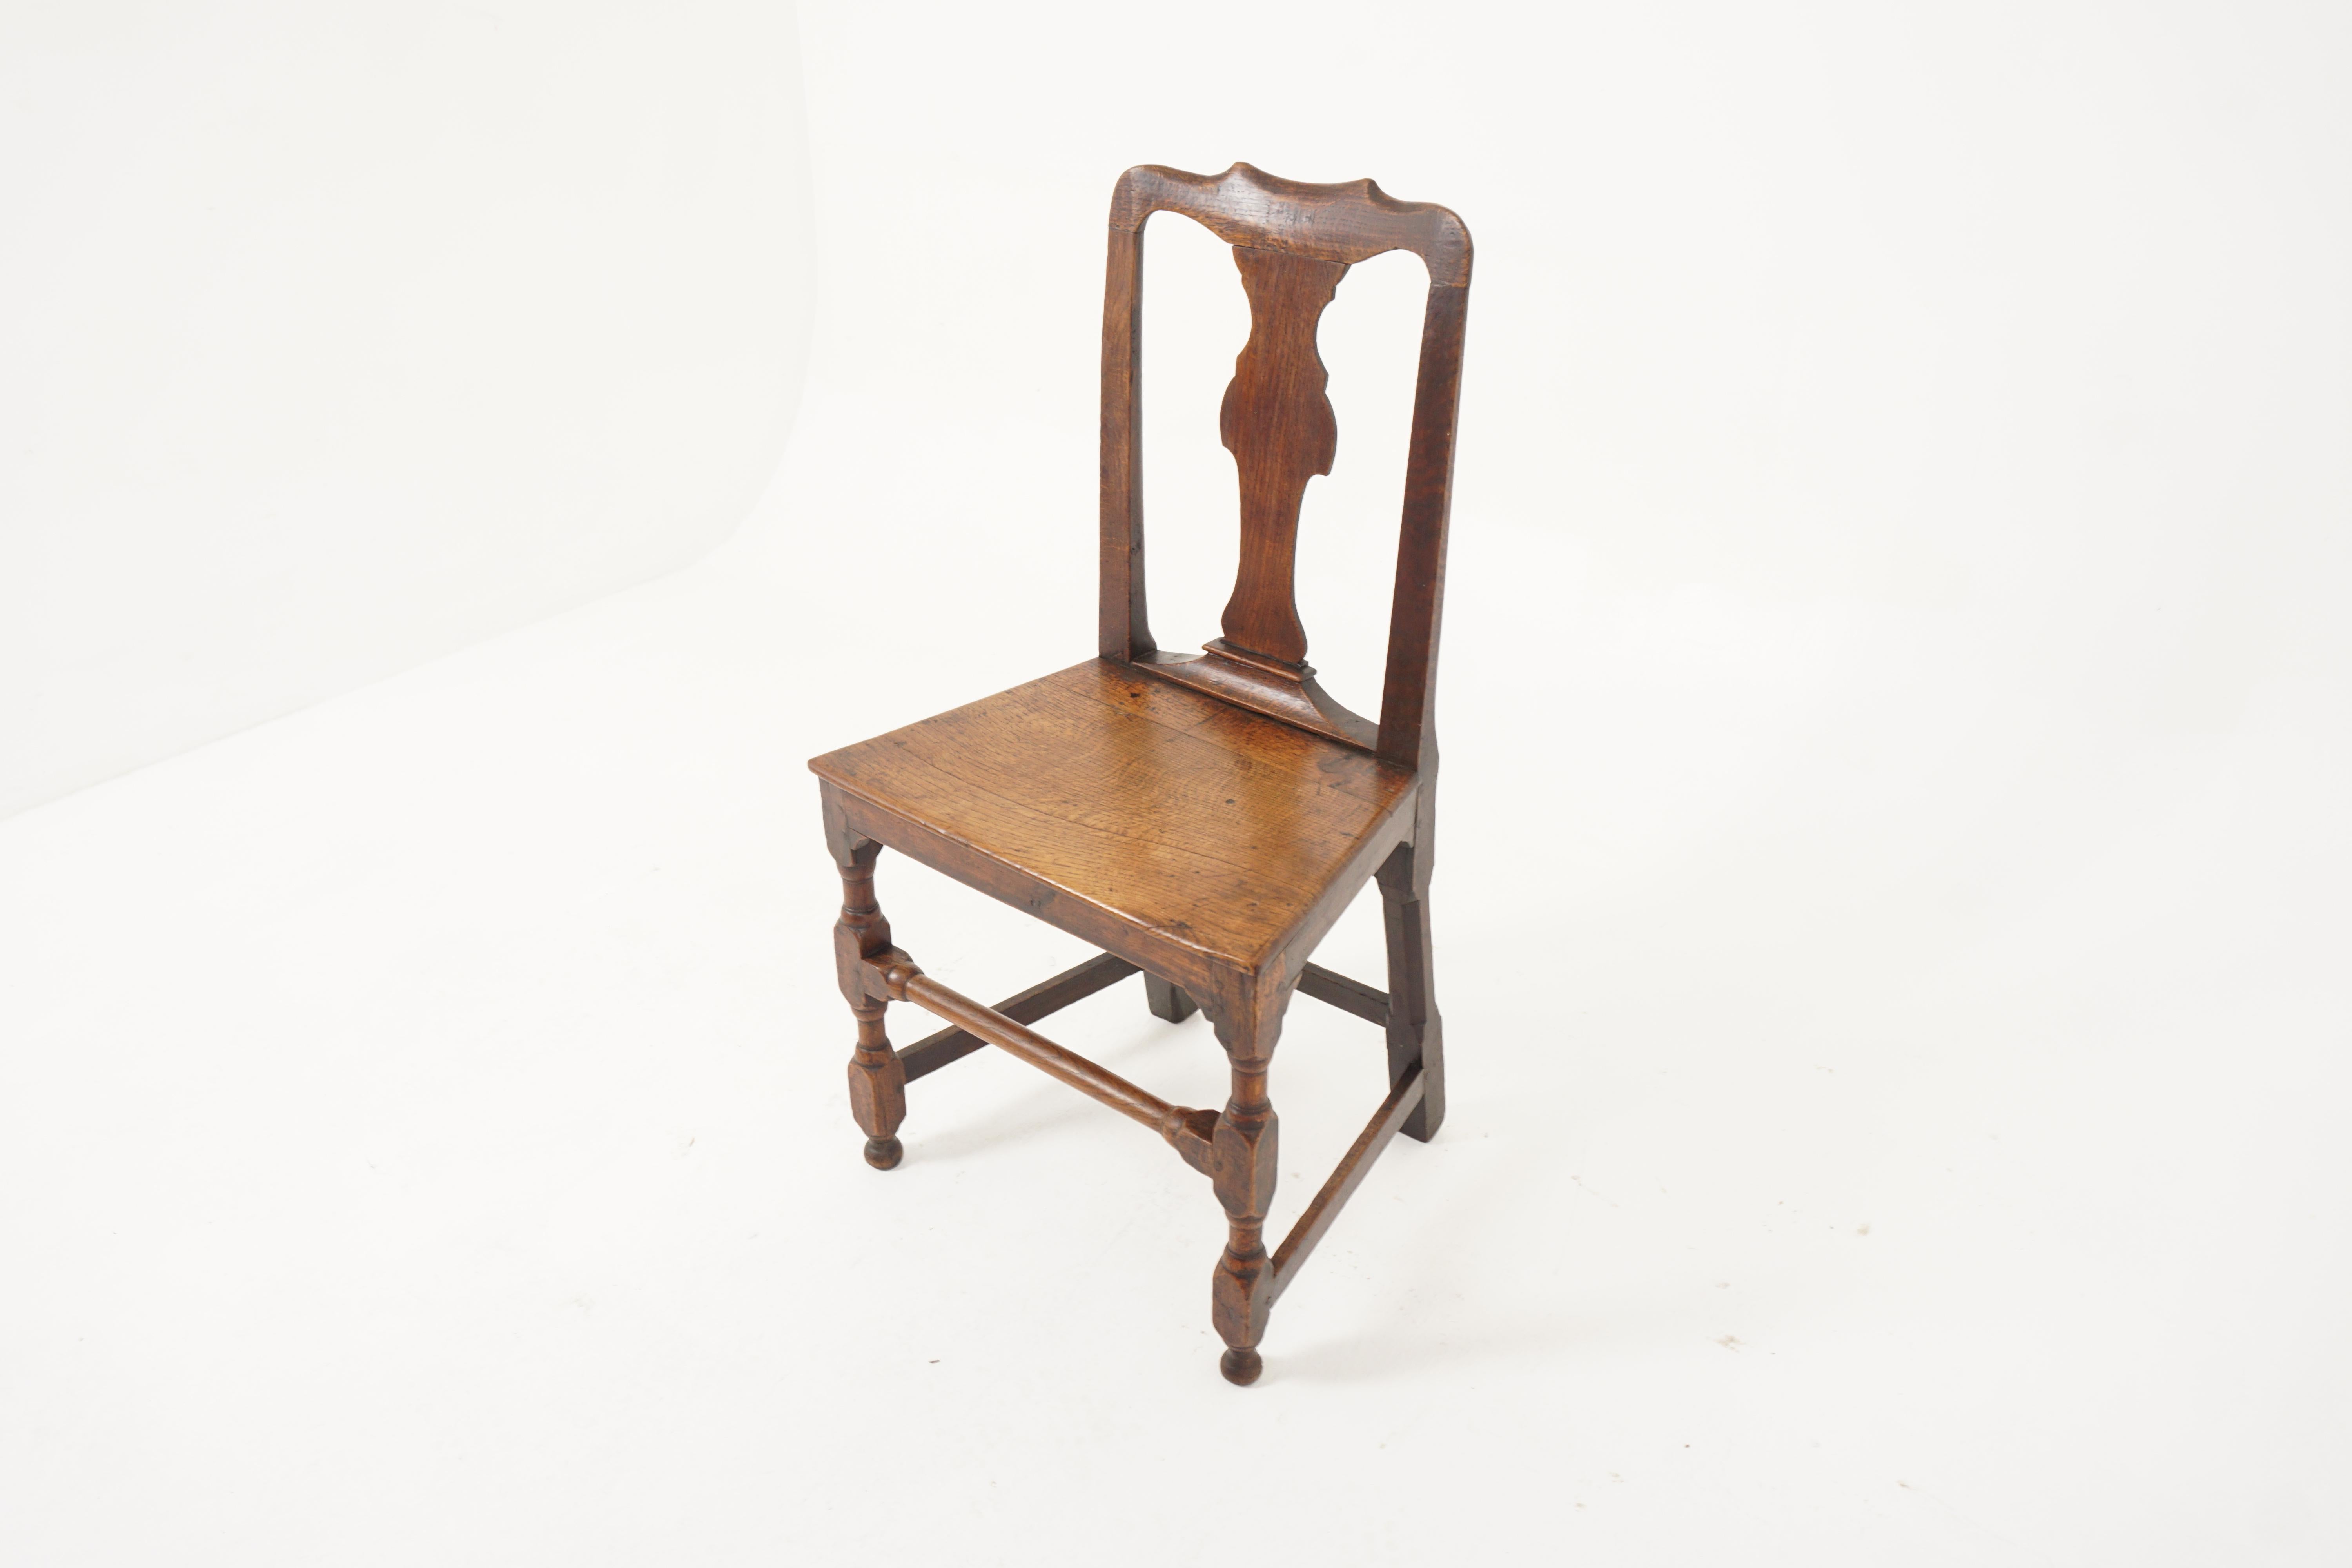 Antique Georgian chair, oak hall chair, Scotland 1790, H262

Scotland 1790
Solid oak
Original finish 
Shaped top rail
Solid wooden seat
On turned legs
Connected by stretchers 

H262

Measures: 20.5